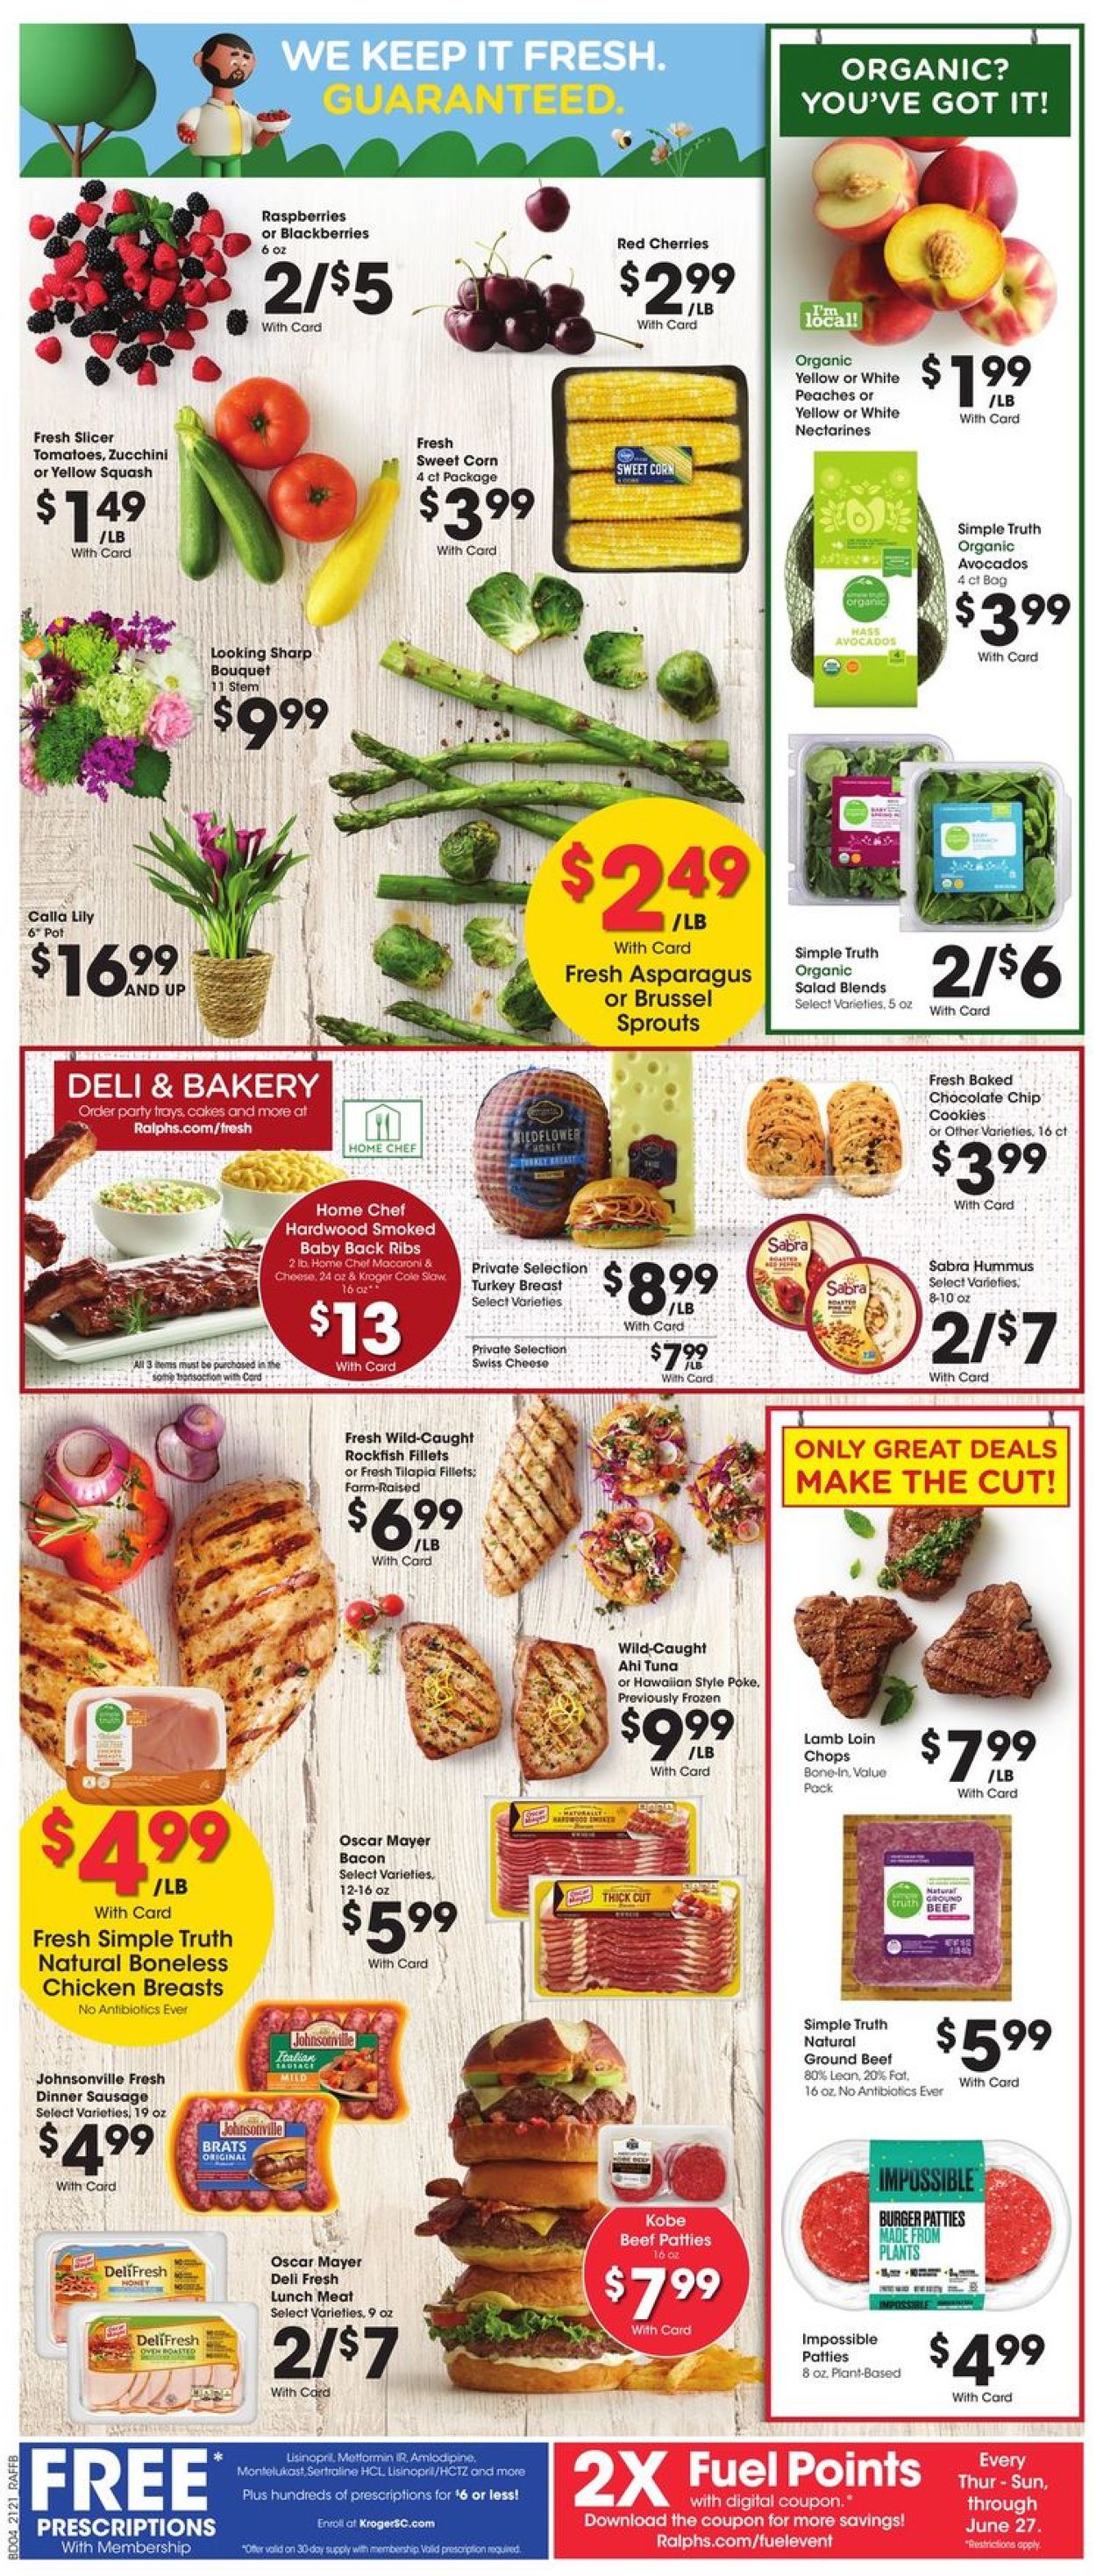 Ralphs Ad from 06/23/2021